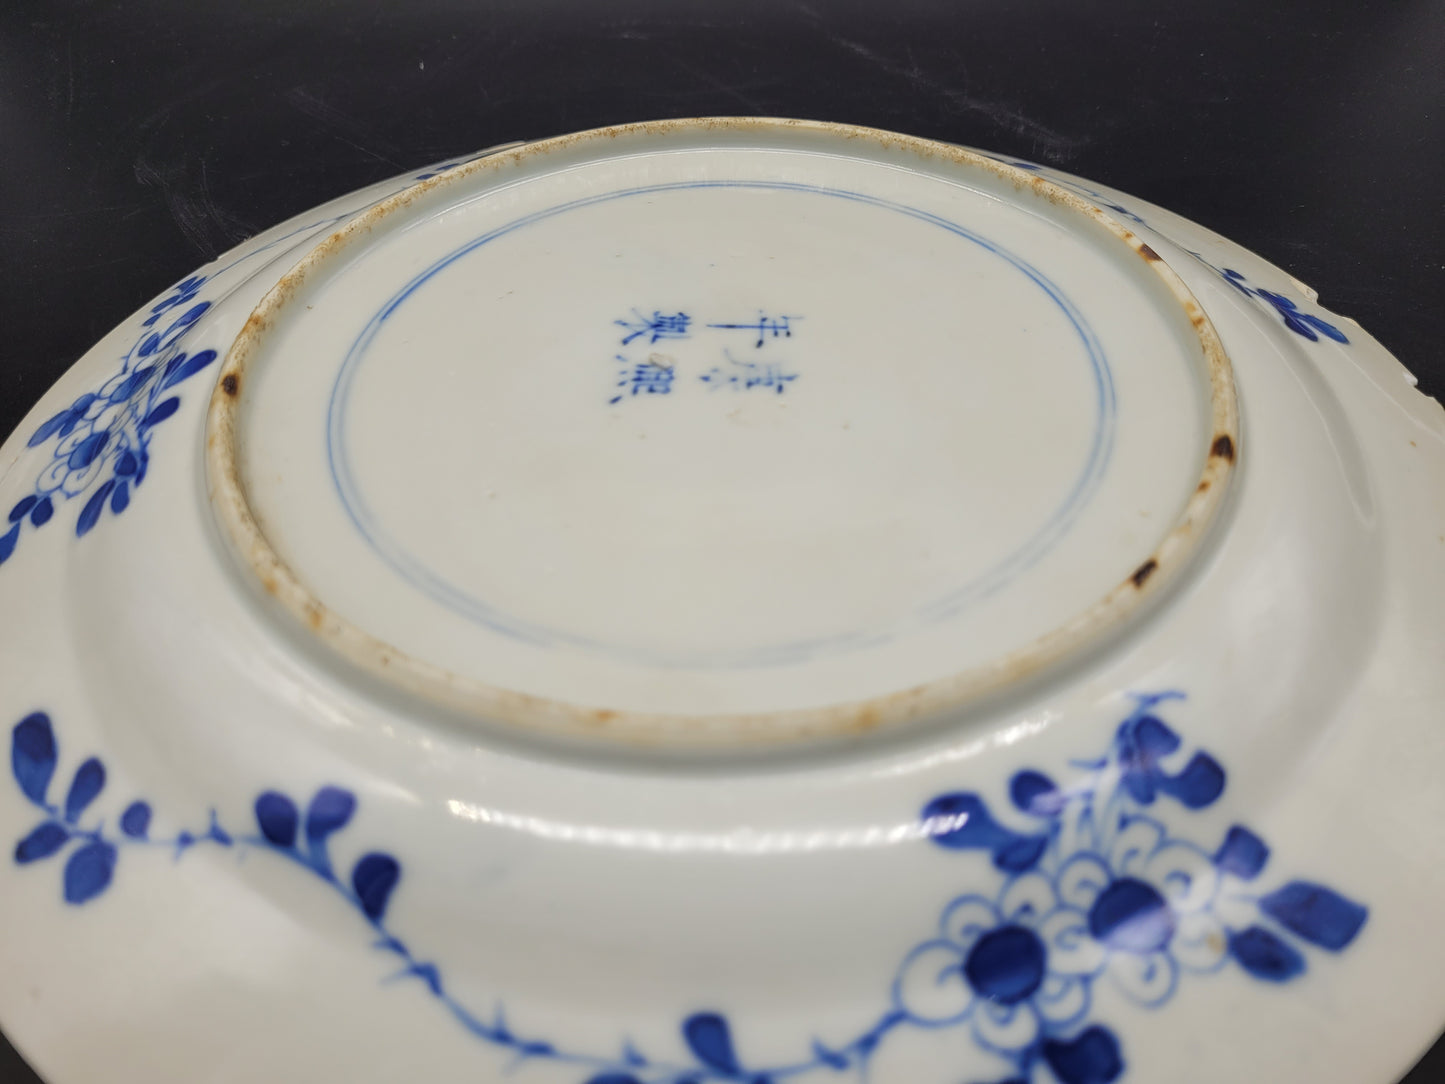 ANTIQUES AUCTIONS UK Beautiful Chinese Kangxi Period ( 1662-1722 ) Blue and White Dragon Plate 